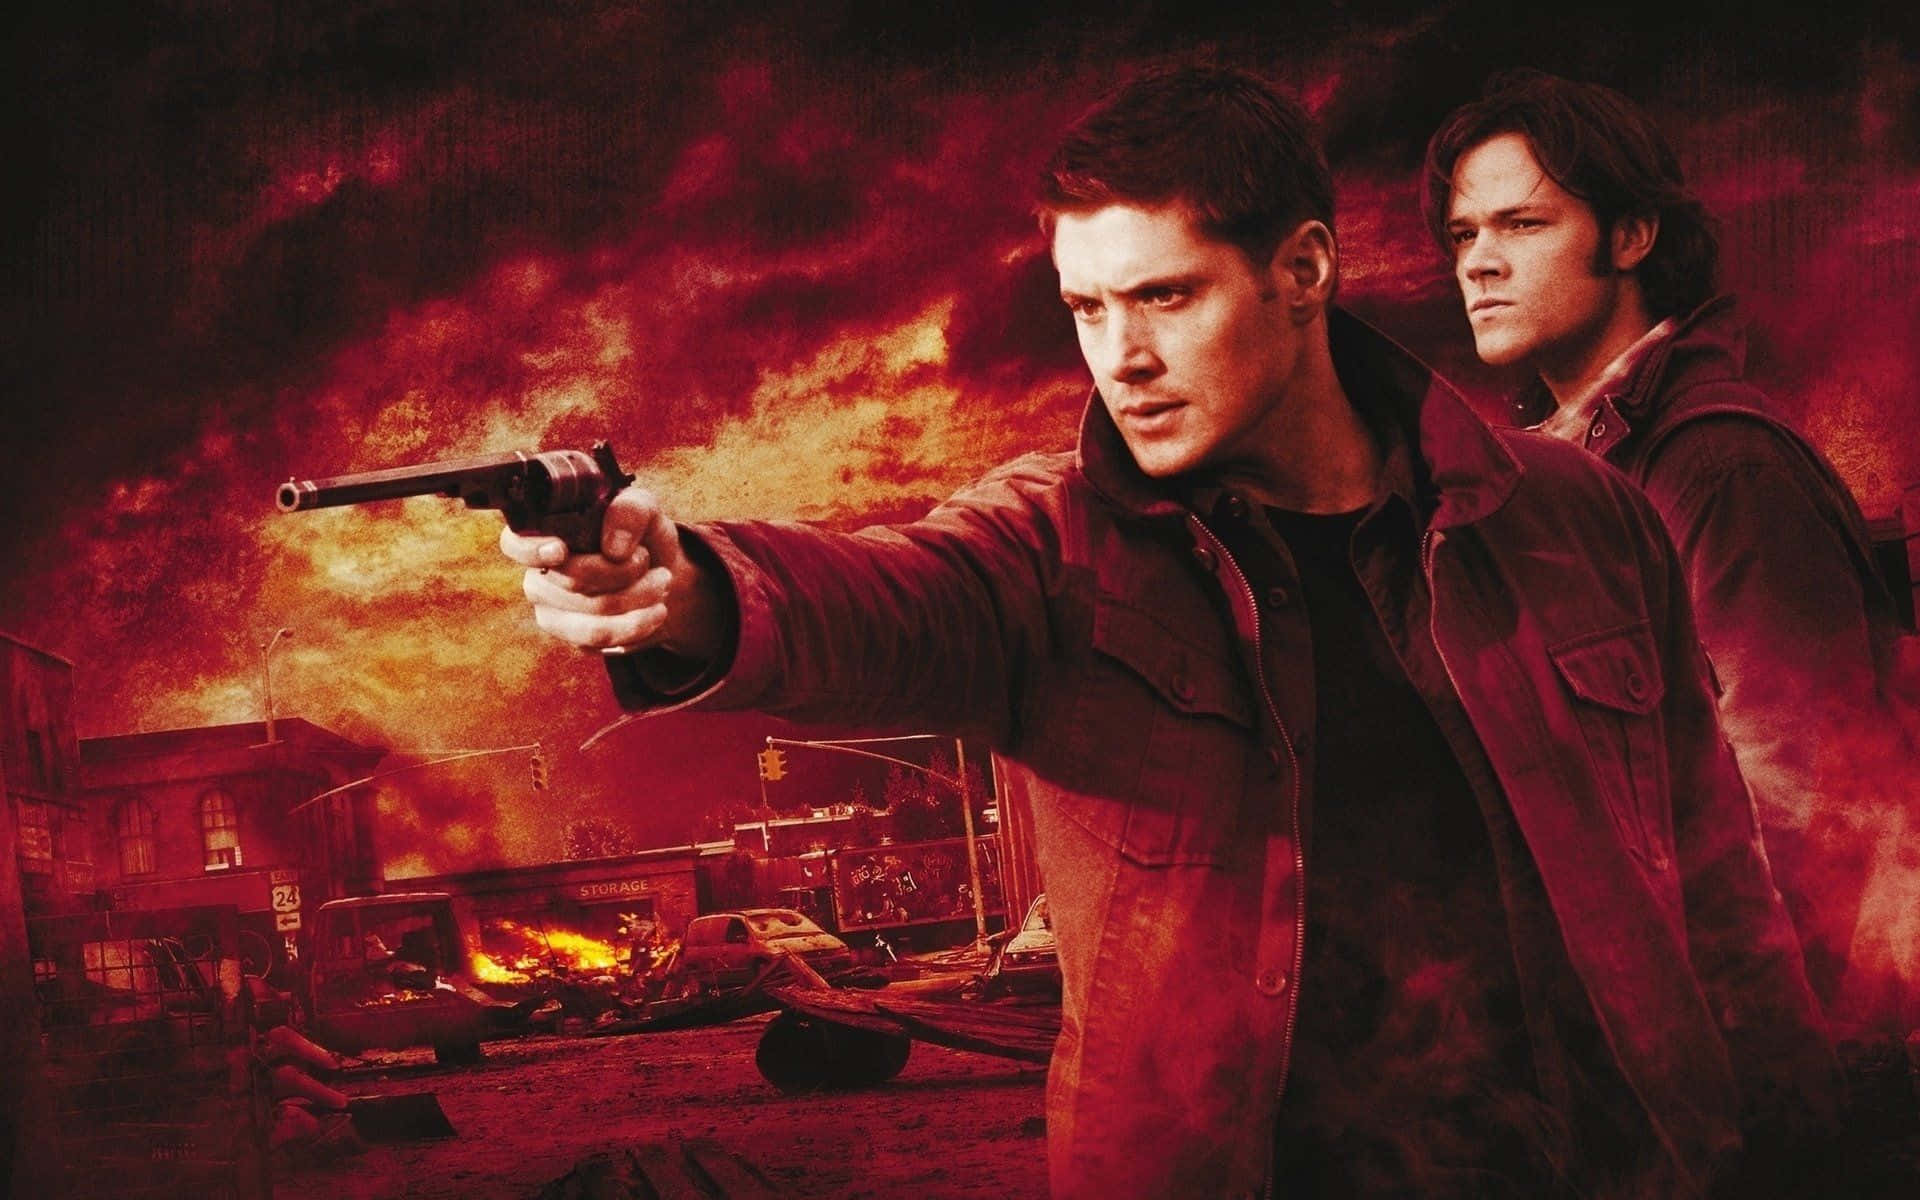 "The Winchester Brothers take on the supernatural forces that seek to destroy them"